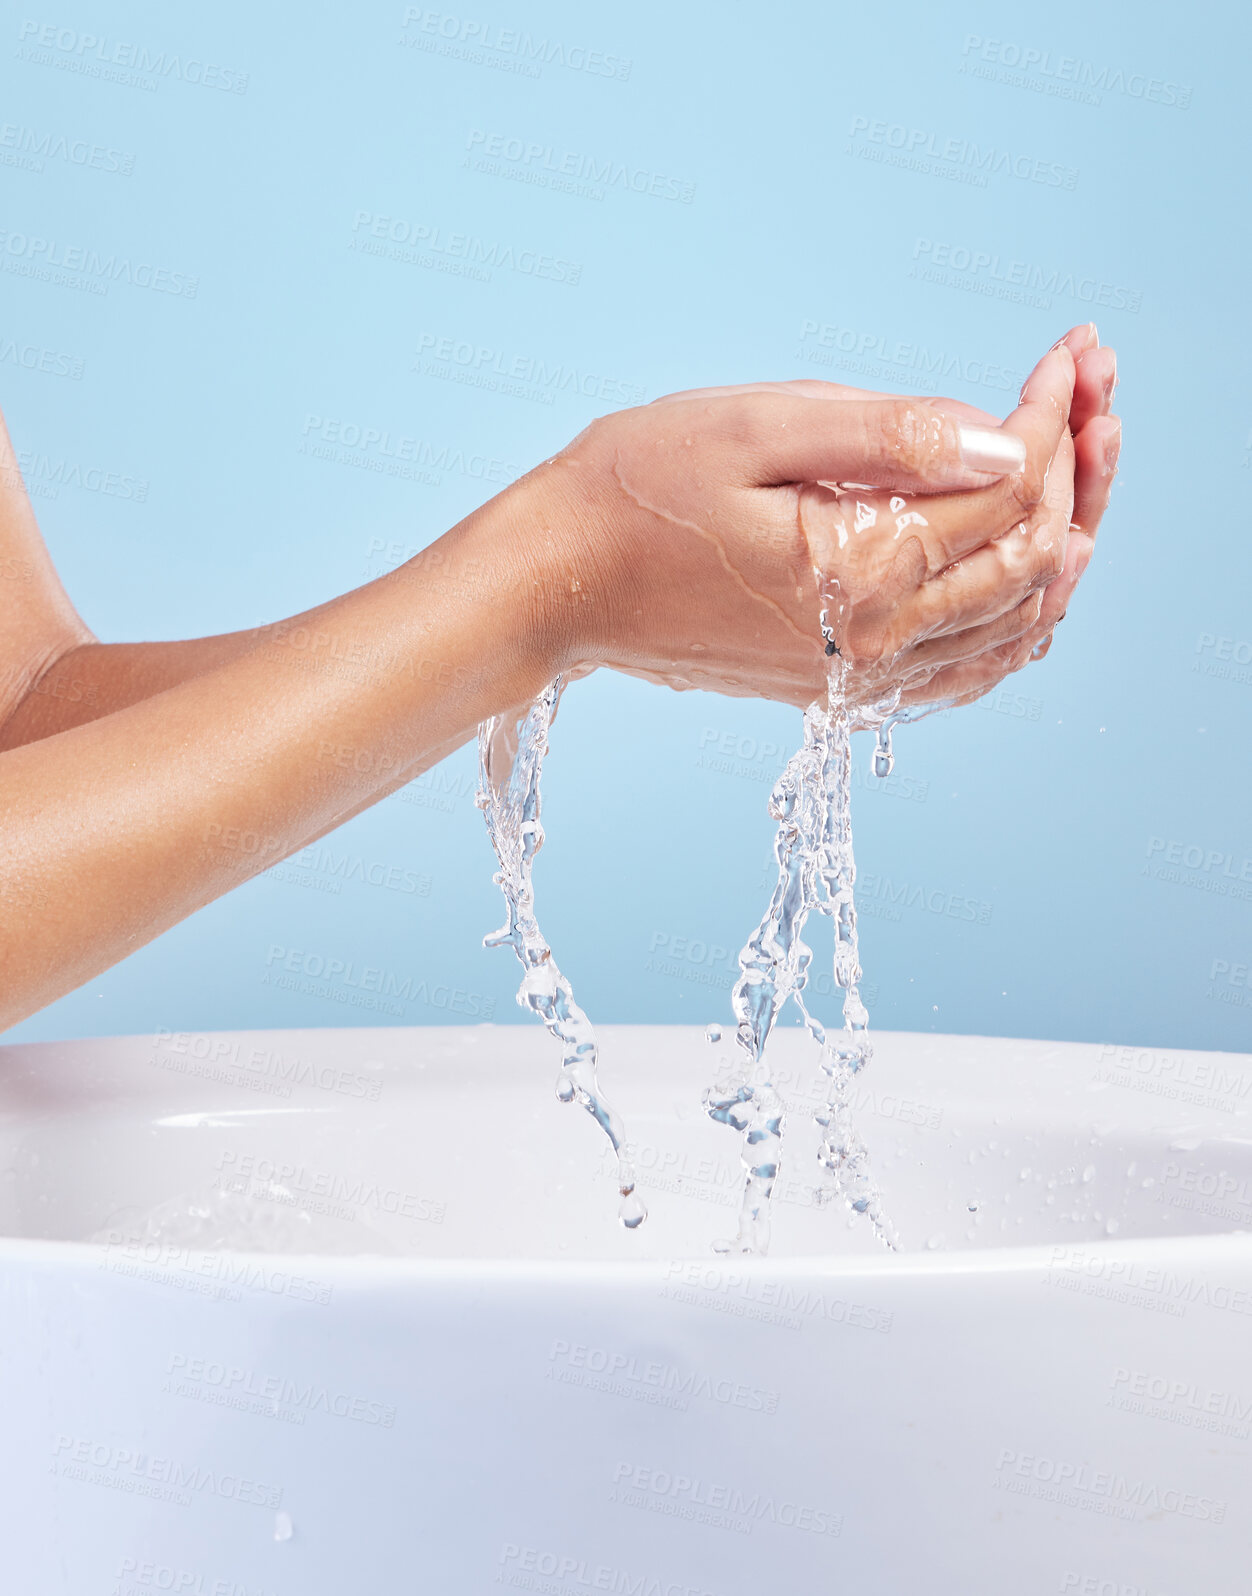 Buy stock photo Shot of an unrecognisable woman washing her hands against a blue background